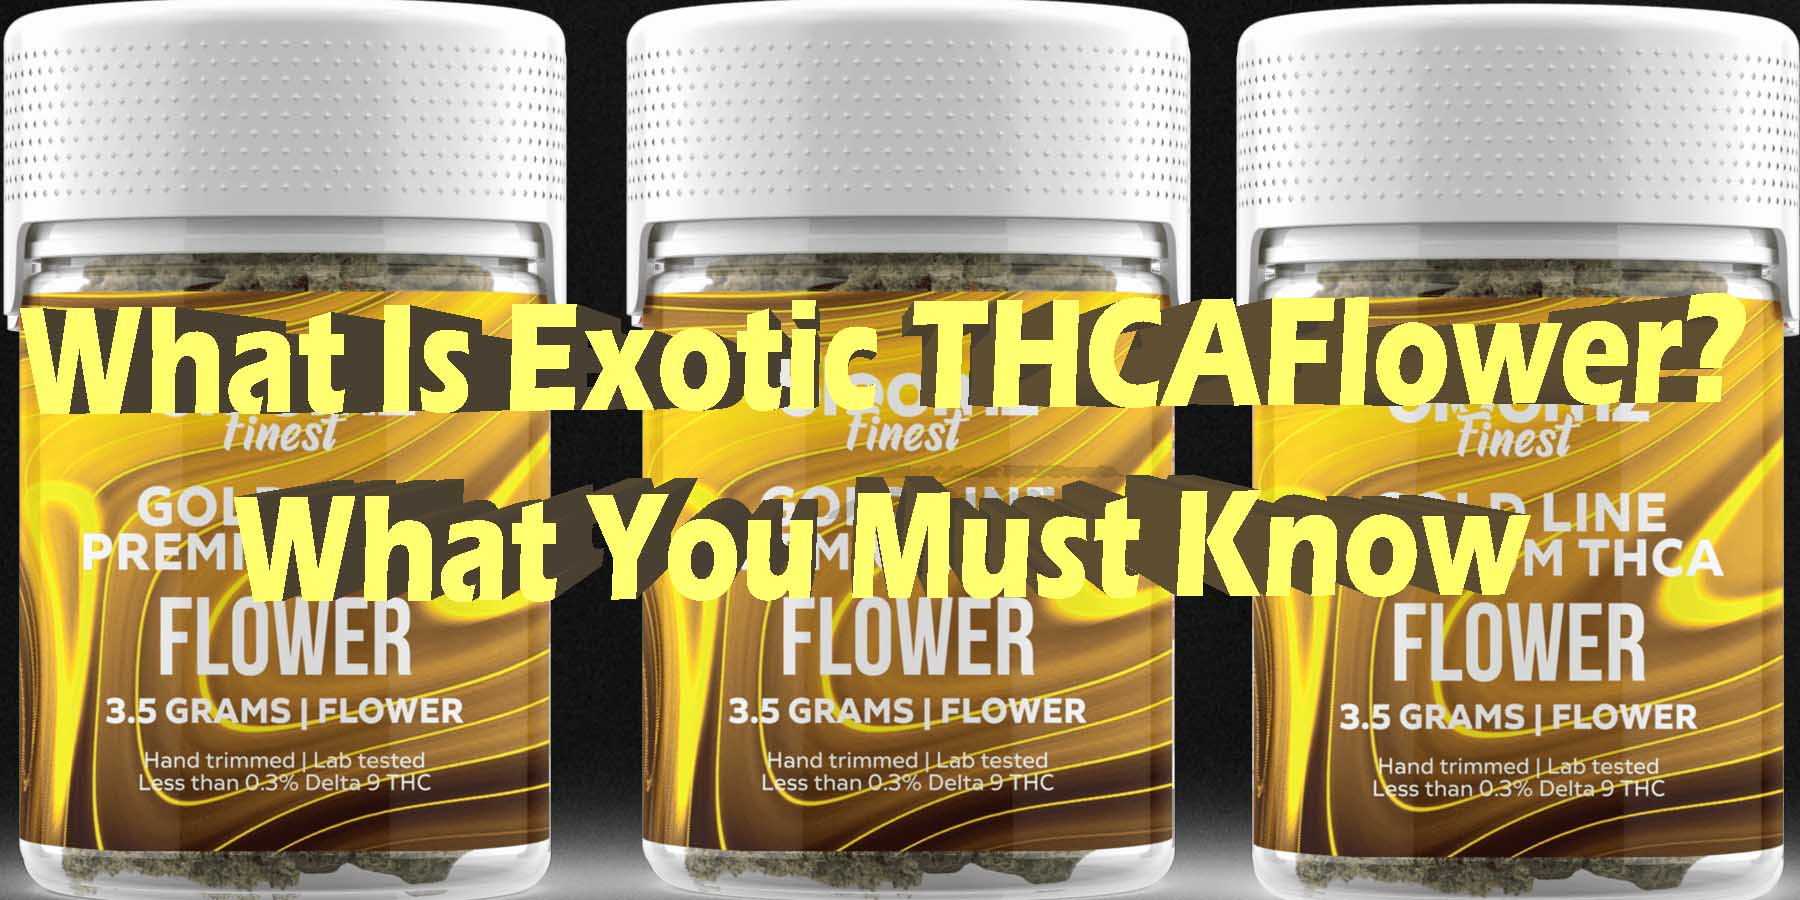 What Is Exotic THCA Flower What You Must Know WhereToGet HowToGetNearMe BestPlace LowestPrice Coupon Discount StrongestBrand BestBrand Binoid Bloomz